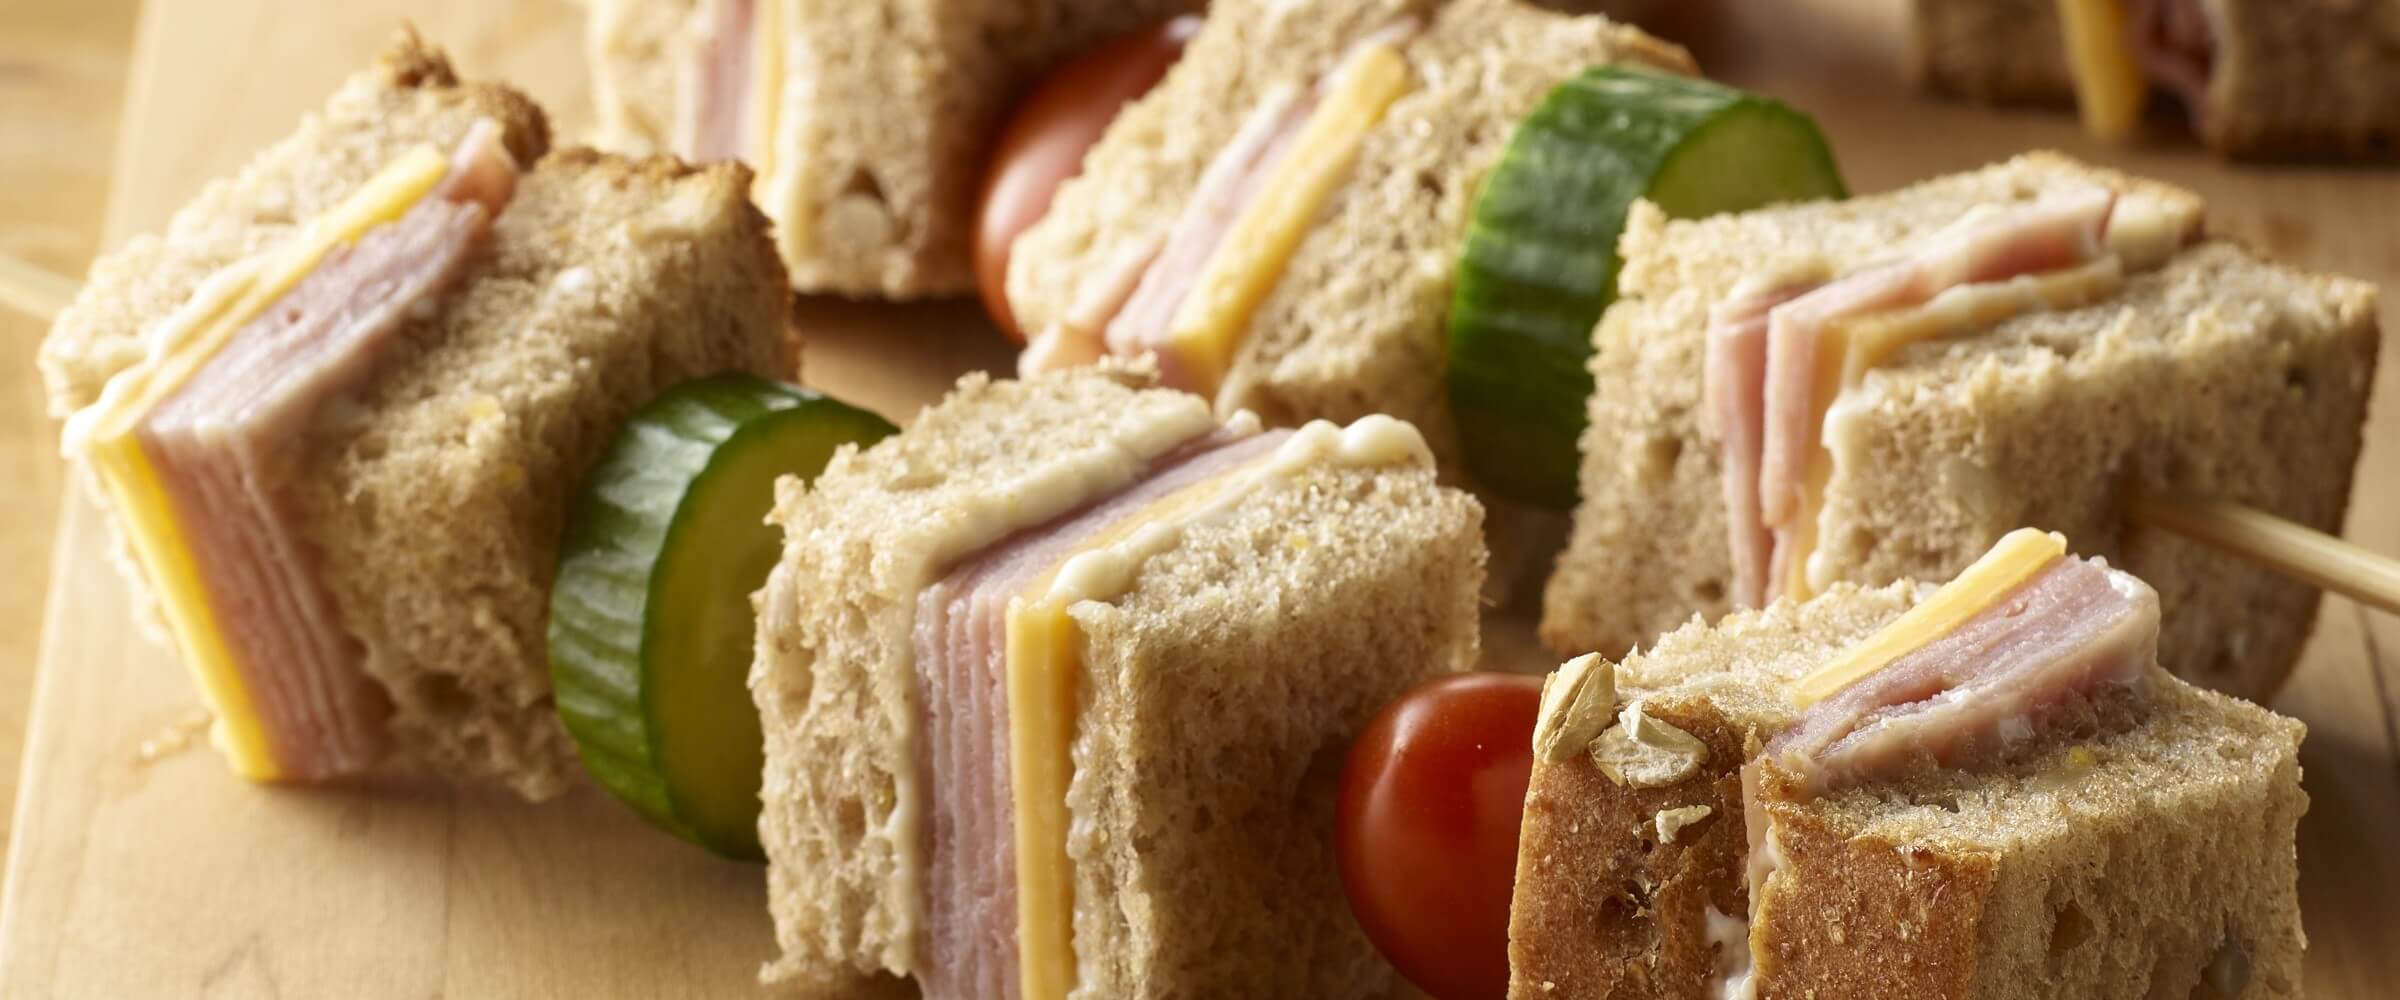 ham and cheese sandwich kabobs with vegetables on wood platter